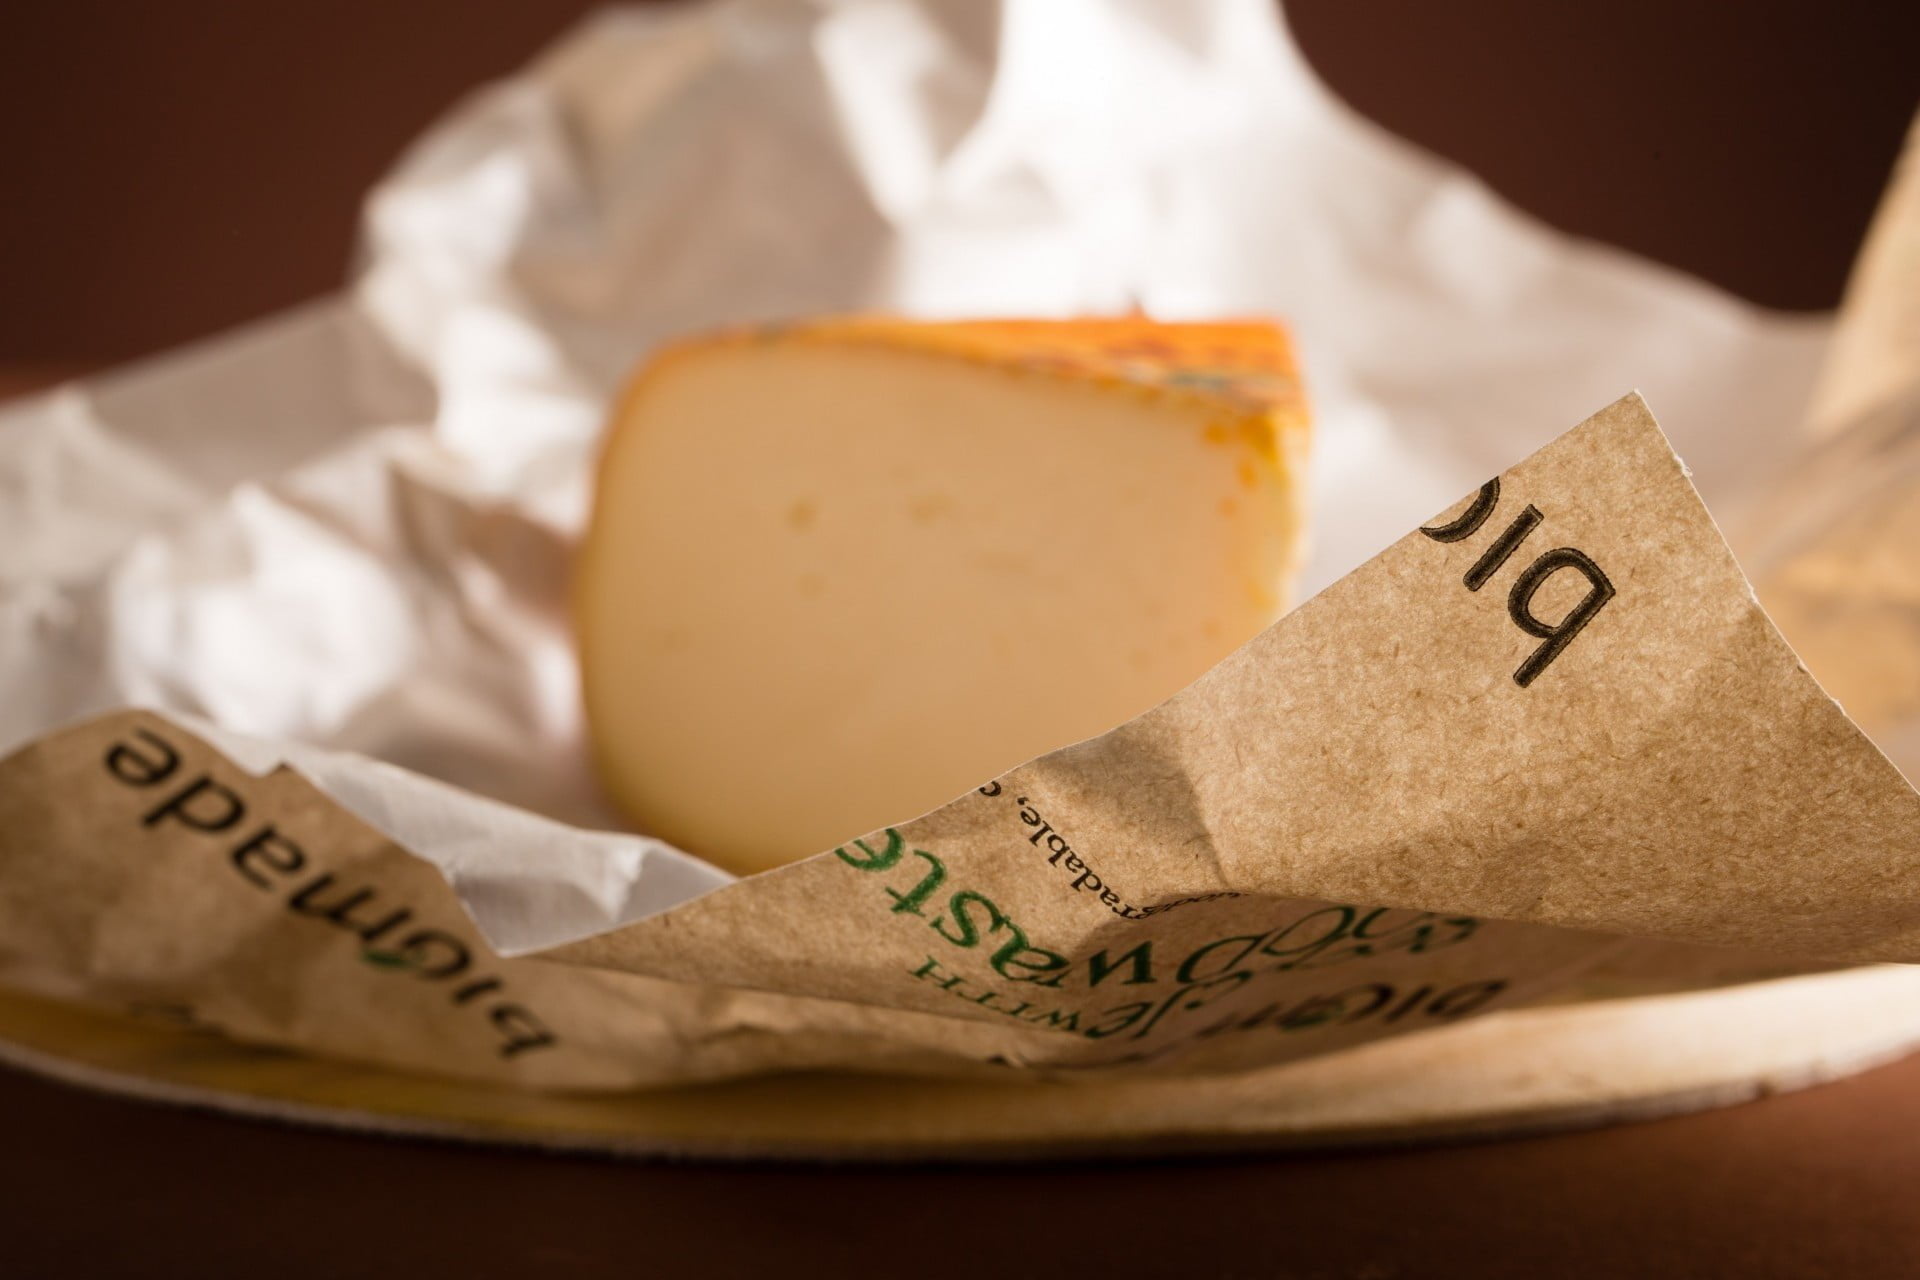 Oil and grease resistant packaging for cheese